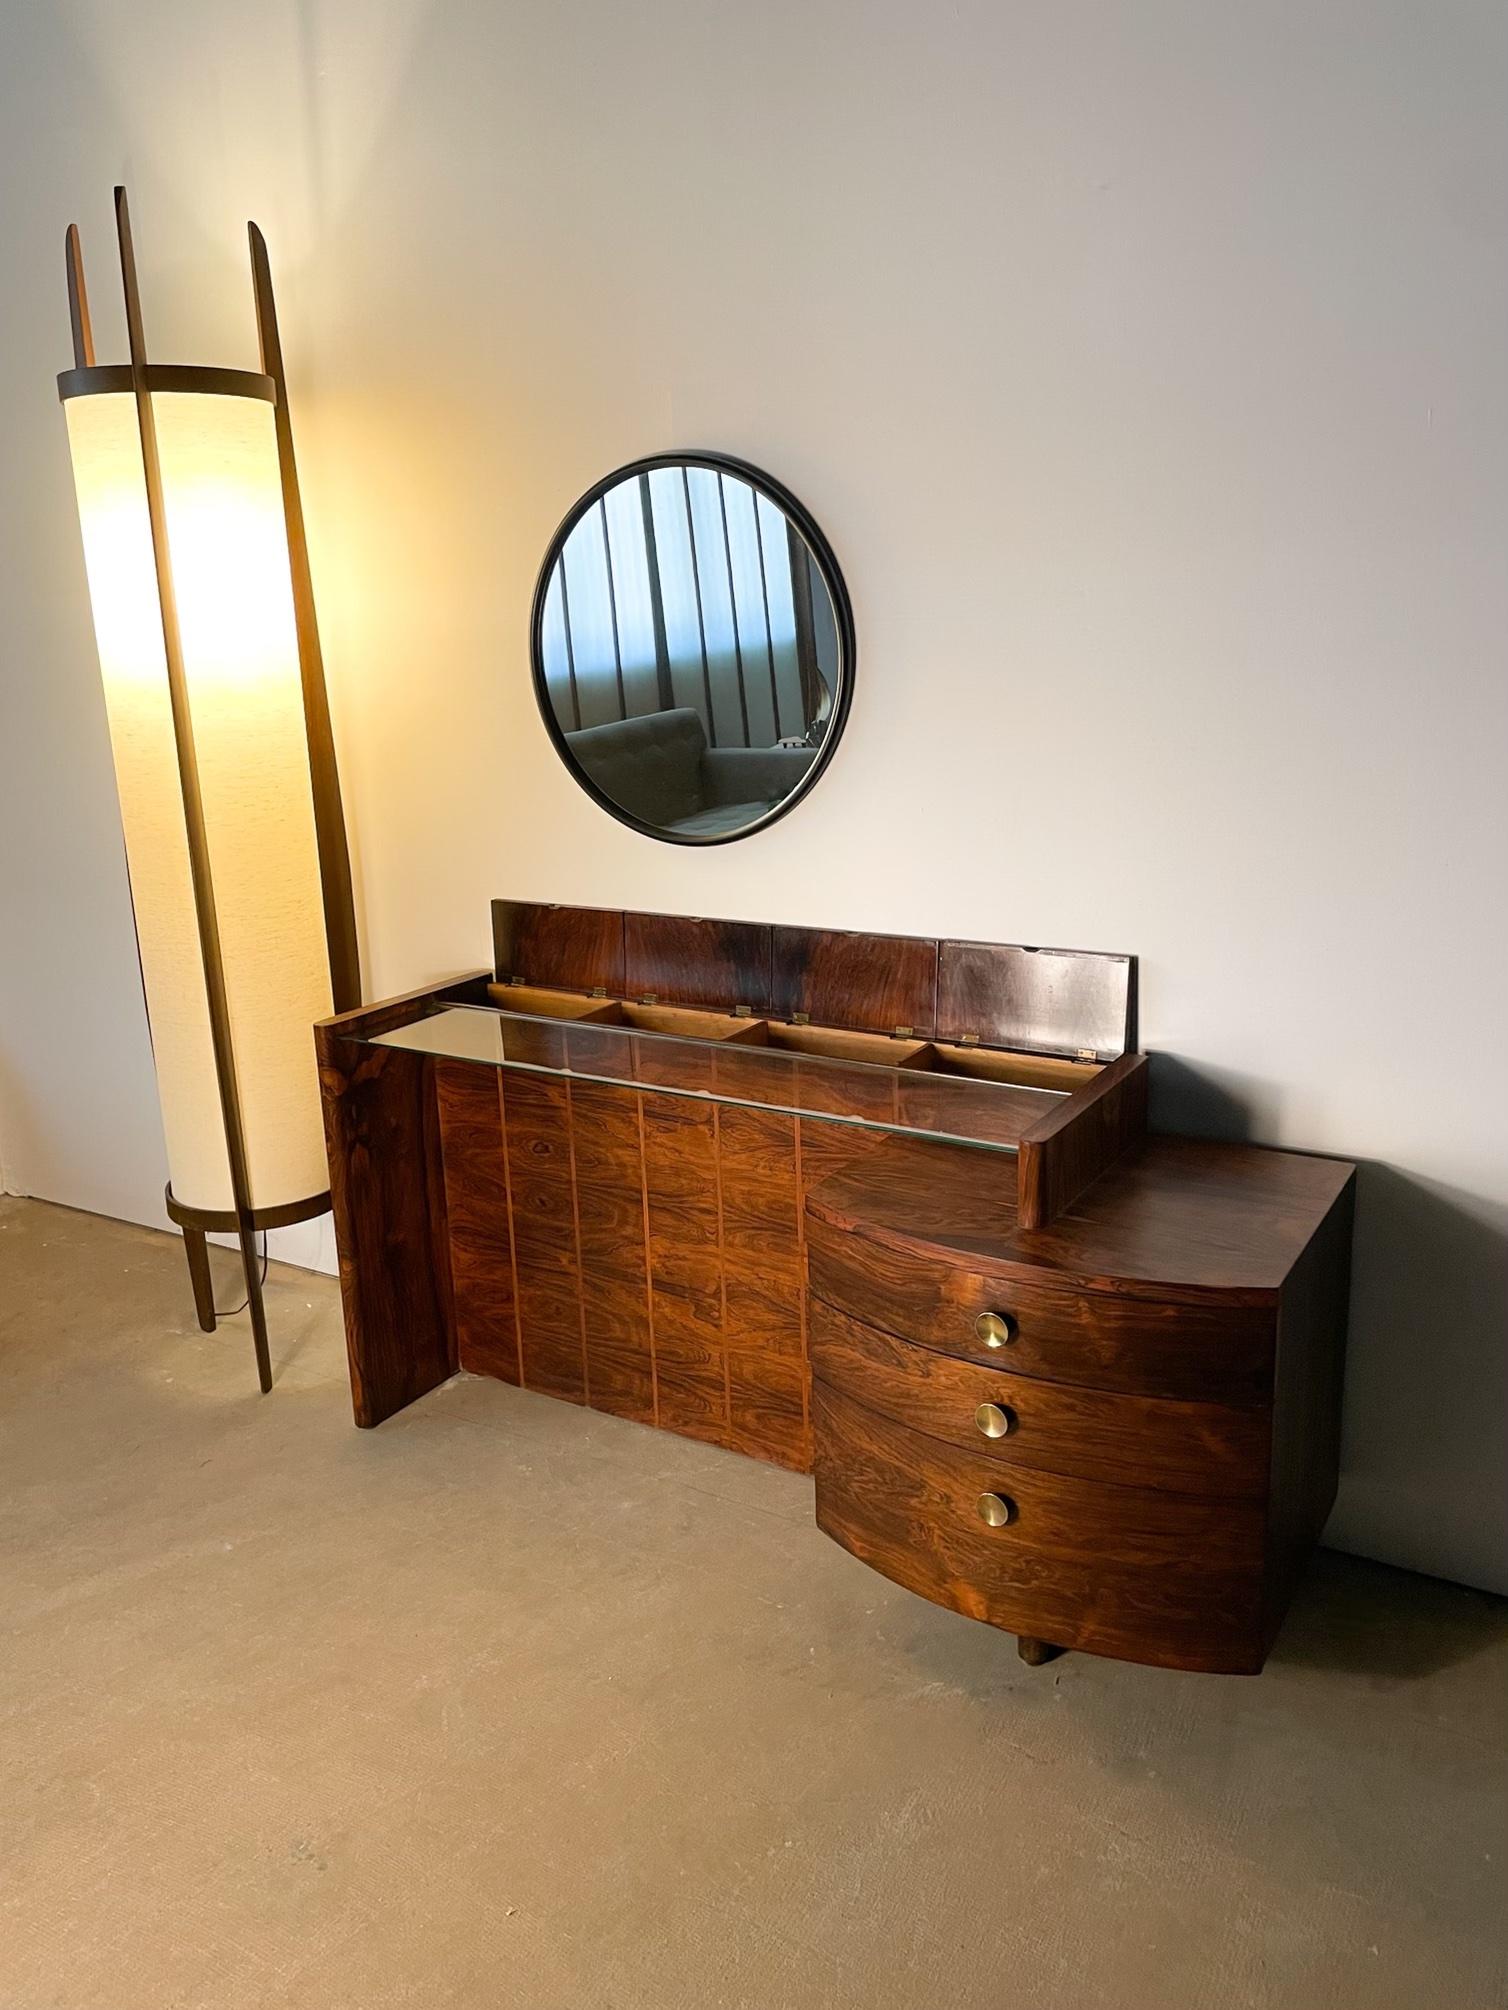 This Brazilian rosewood vanity is a stunning item from Gilbert Rohde’s 3707 series for Herman Miller, produced in 1937. Rohde’s sublime early modern stylings of minimalist planes, floating volumes, and simple but refined details are all on display